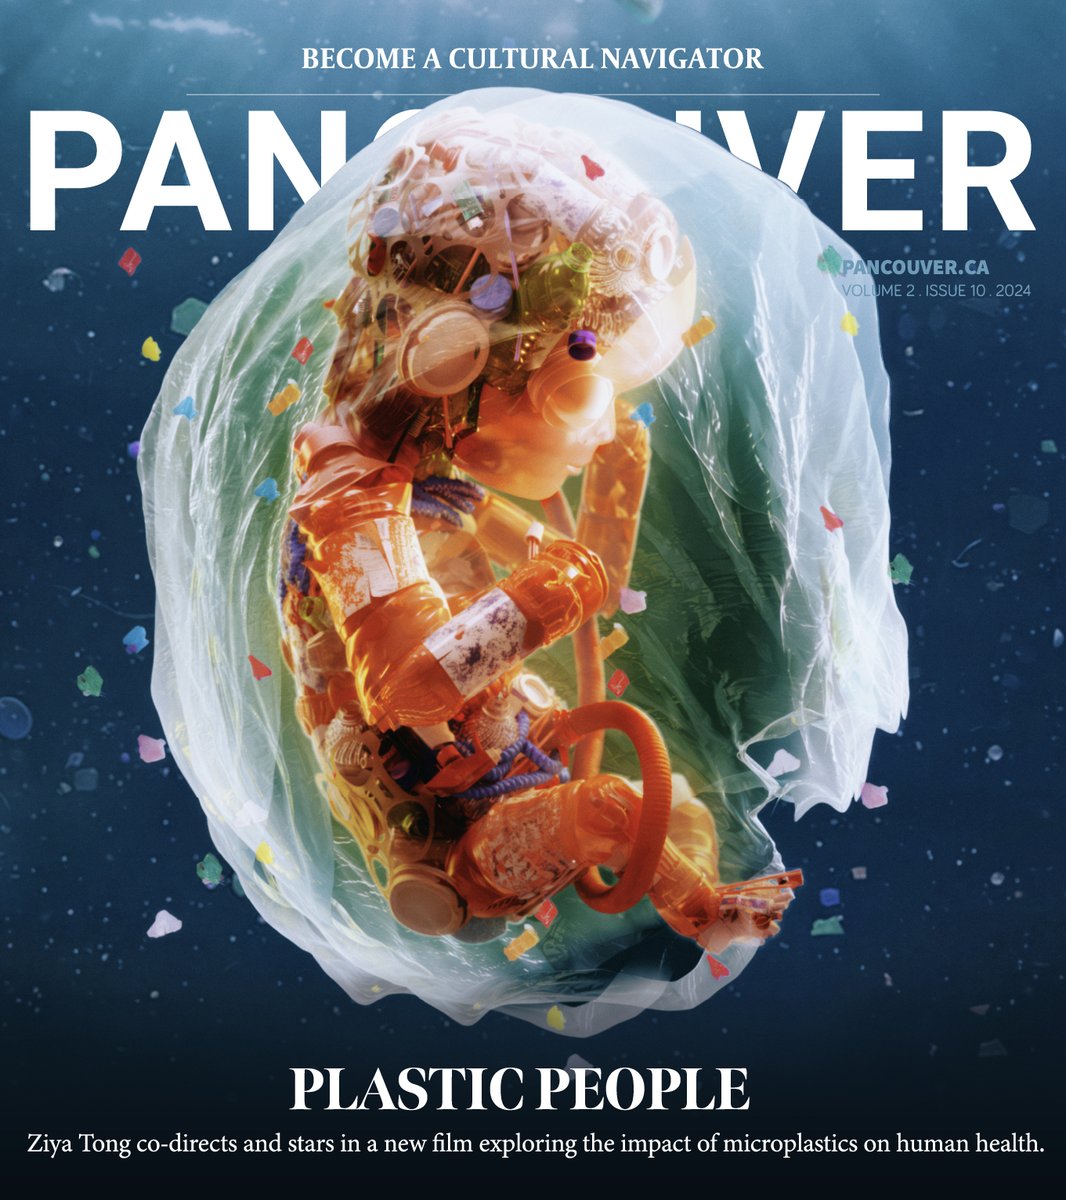 Canadian science journalist Ziya Tong teams up with Ben Addelman to direct documentary on the real impacts of plastics on human health. Plastic People will be screened at @DOXAFestival on May 10. tinyurl.com/doxaplastics